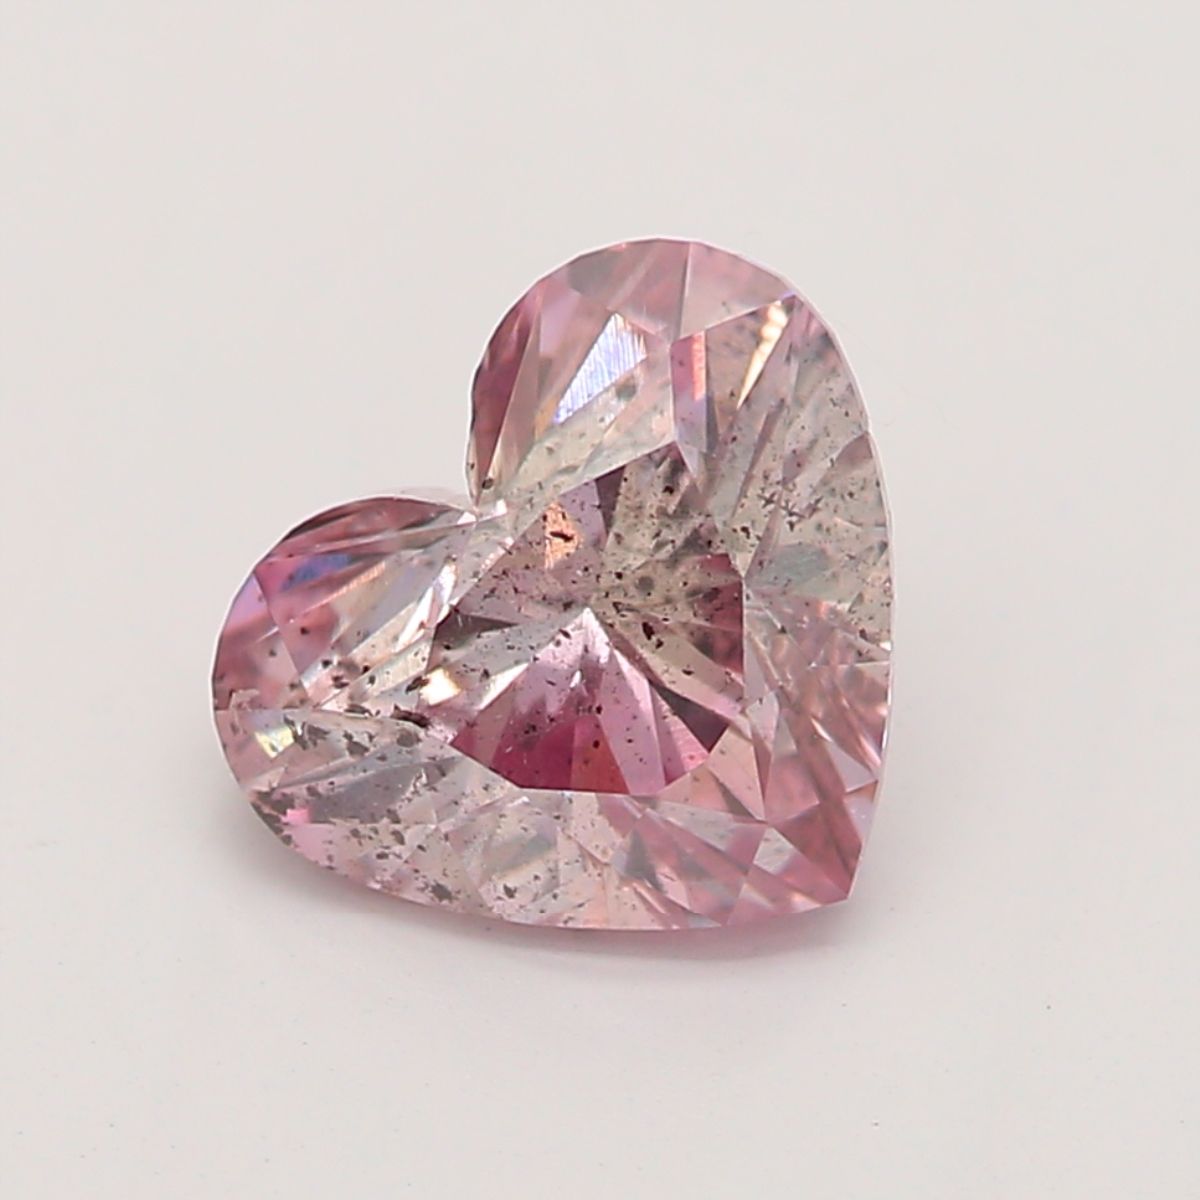 0.70 Carat Heart Loose Diamond, Fancy Brown-Pink, I2, Excellent, GIA Certified | Thumbnail